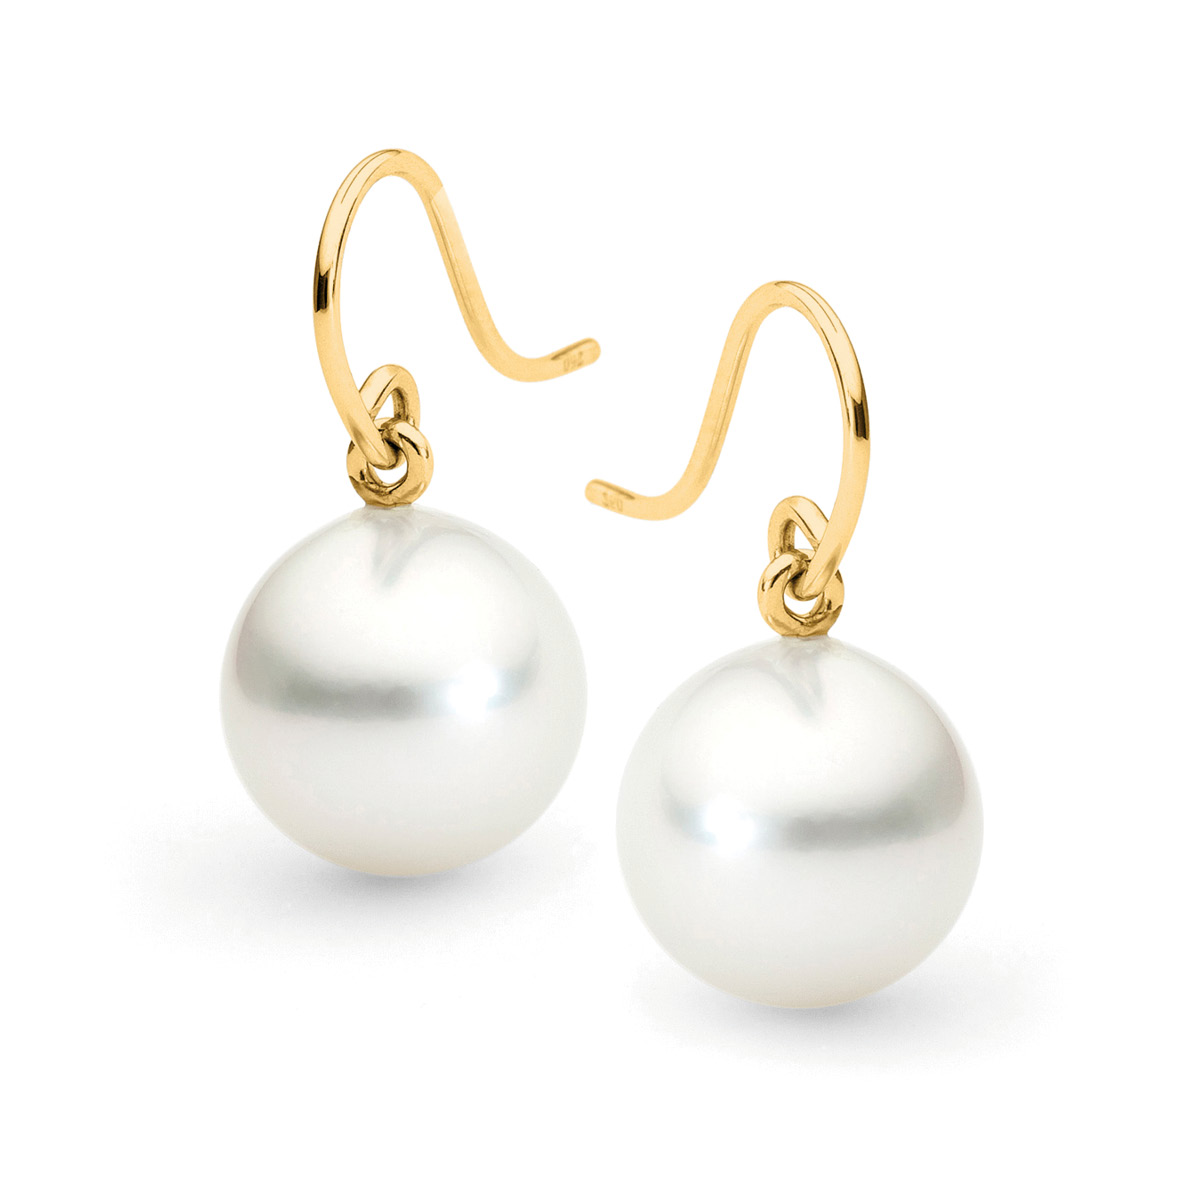 Fine French Hook Articulated Pearl Earrings - Allure South Sea Pearls